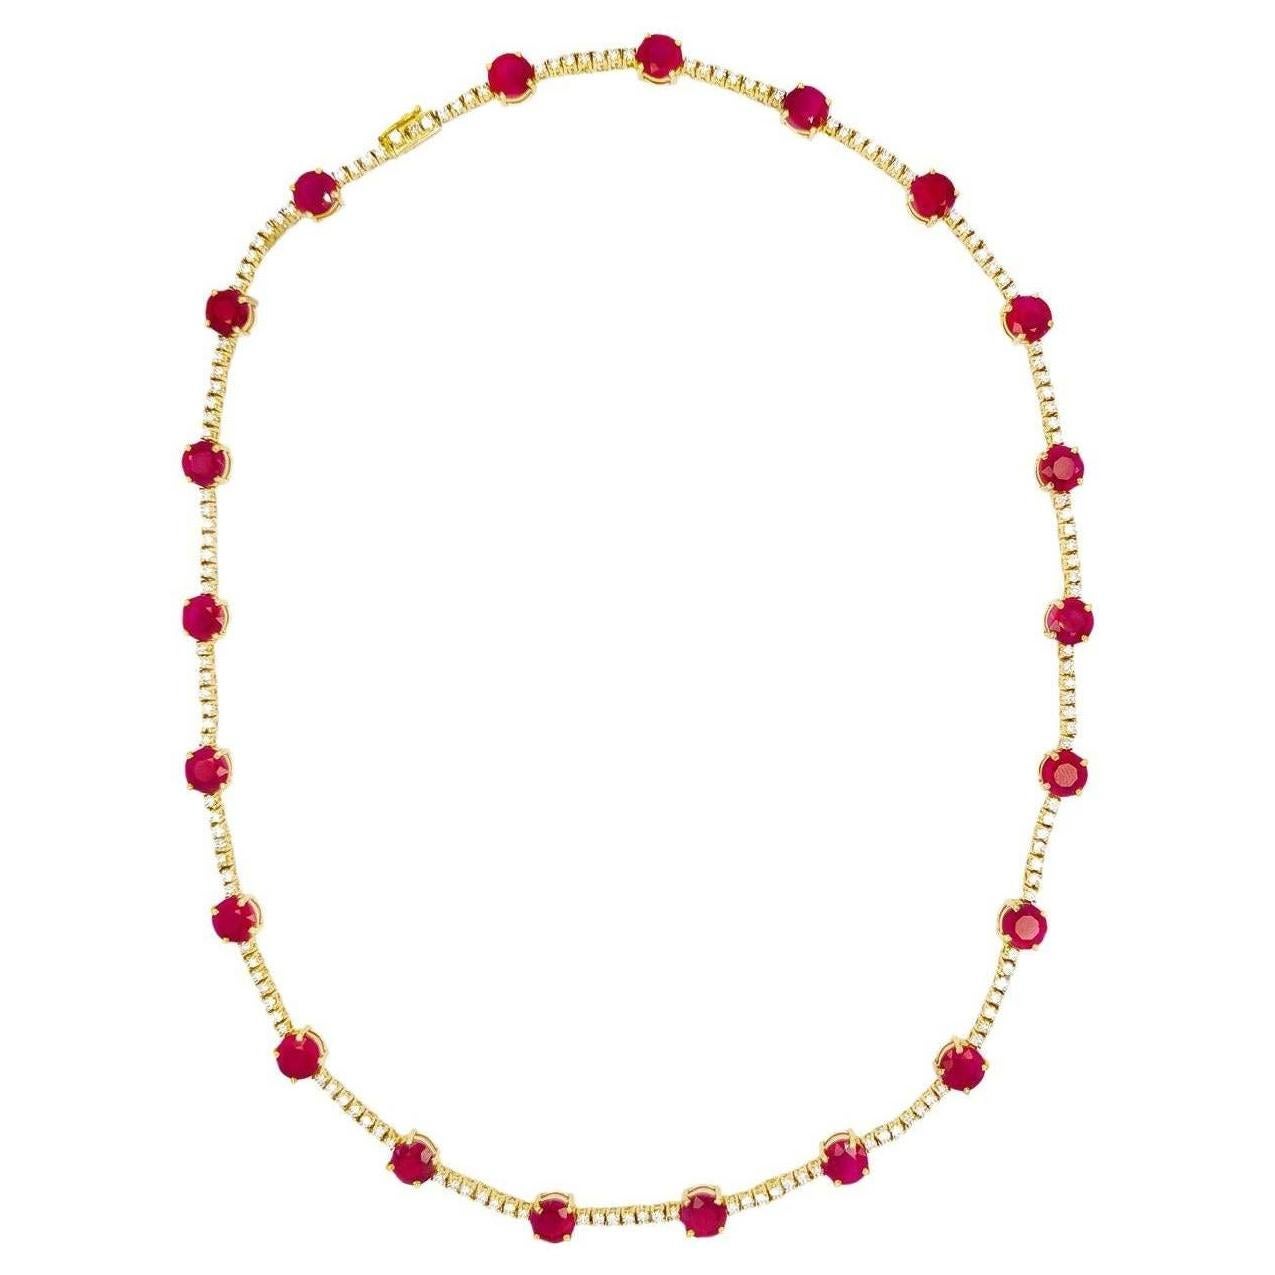 Round Cut 25.10 Carats Ruby Necklace with 2.48 Carats of Diamonds 18K Gold